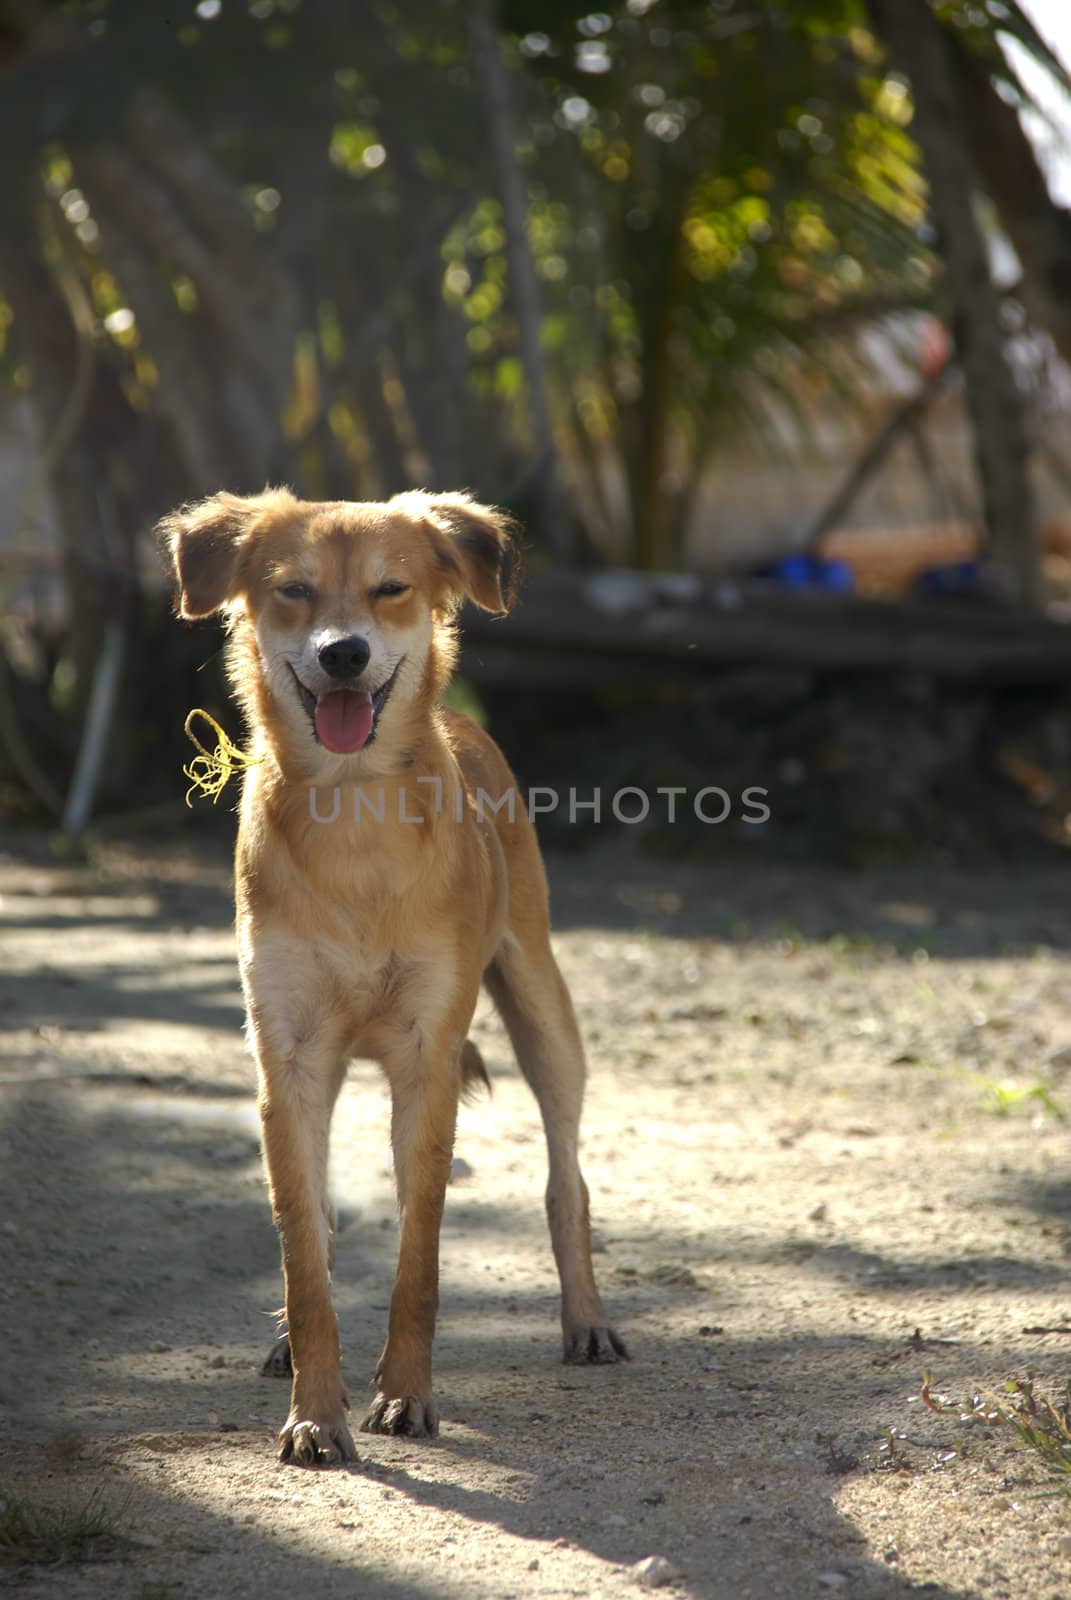 A cute dog stands happily in the middle of a dirt road